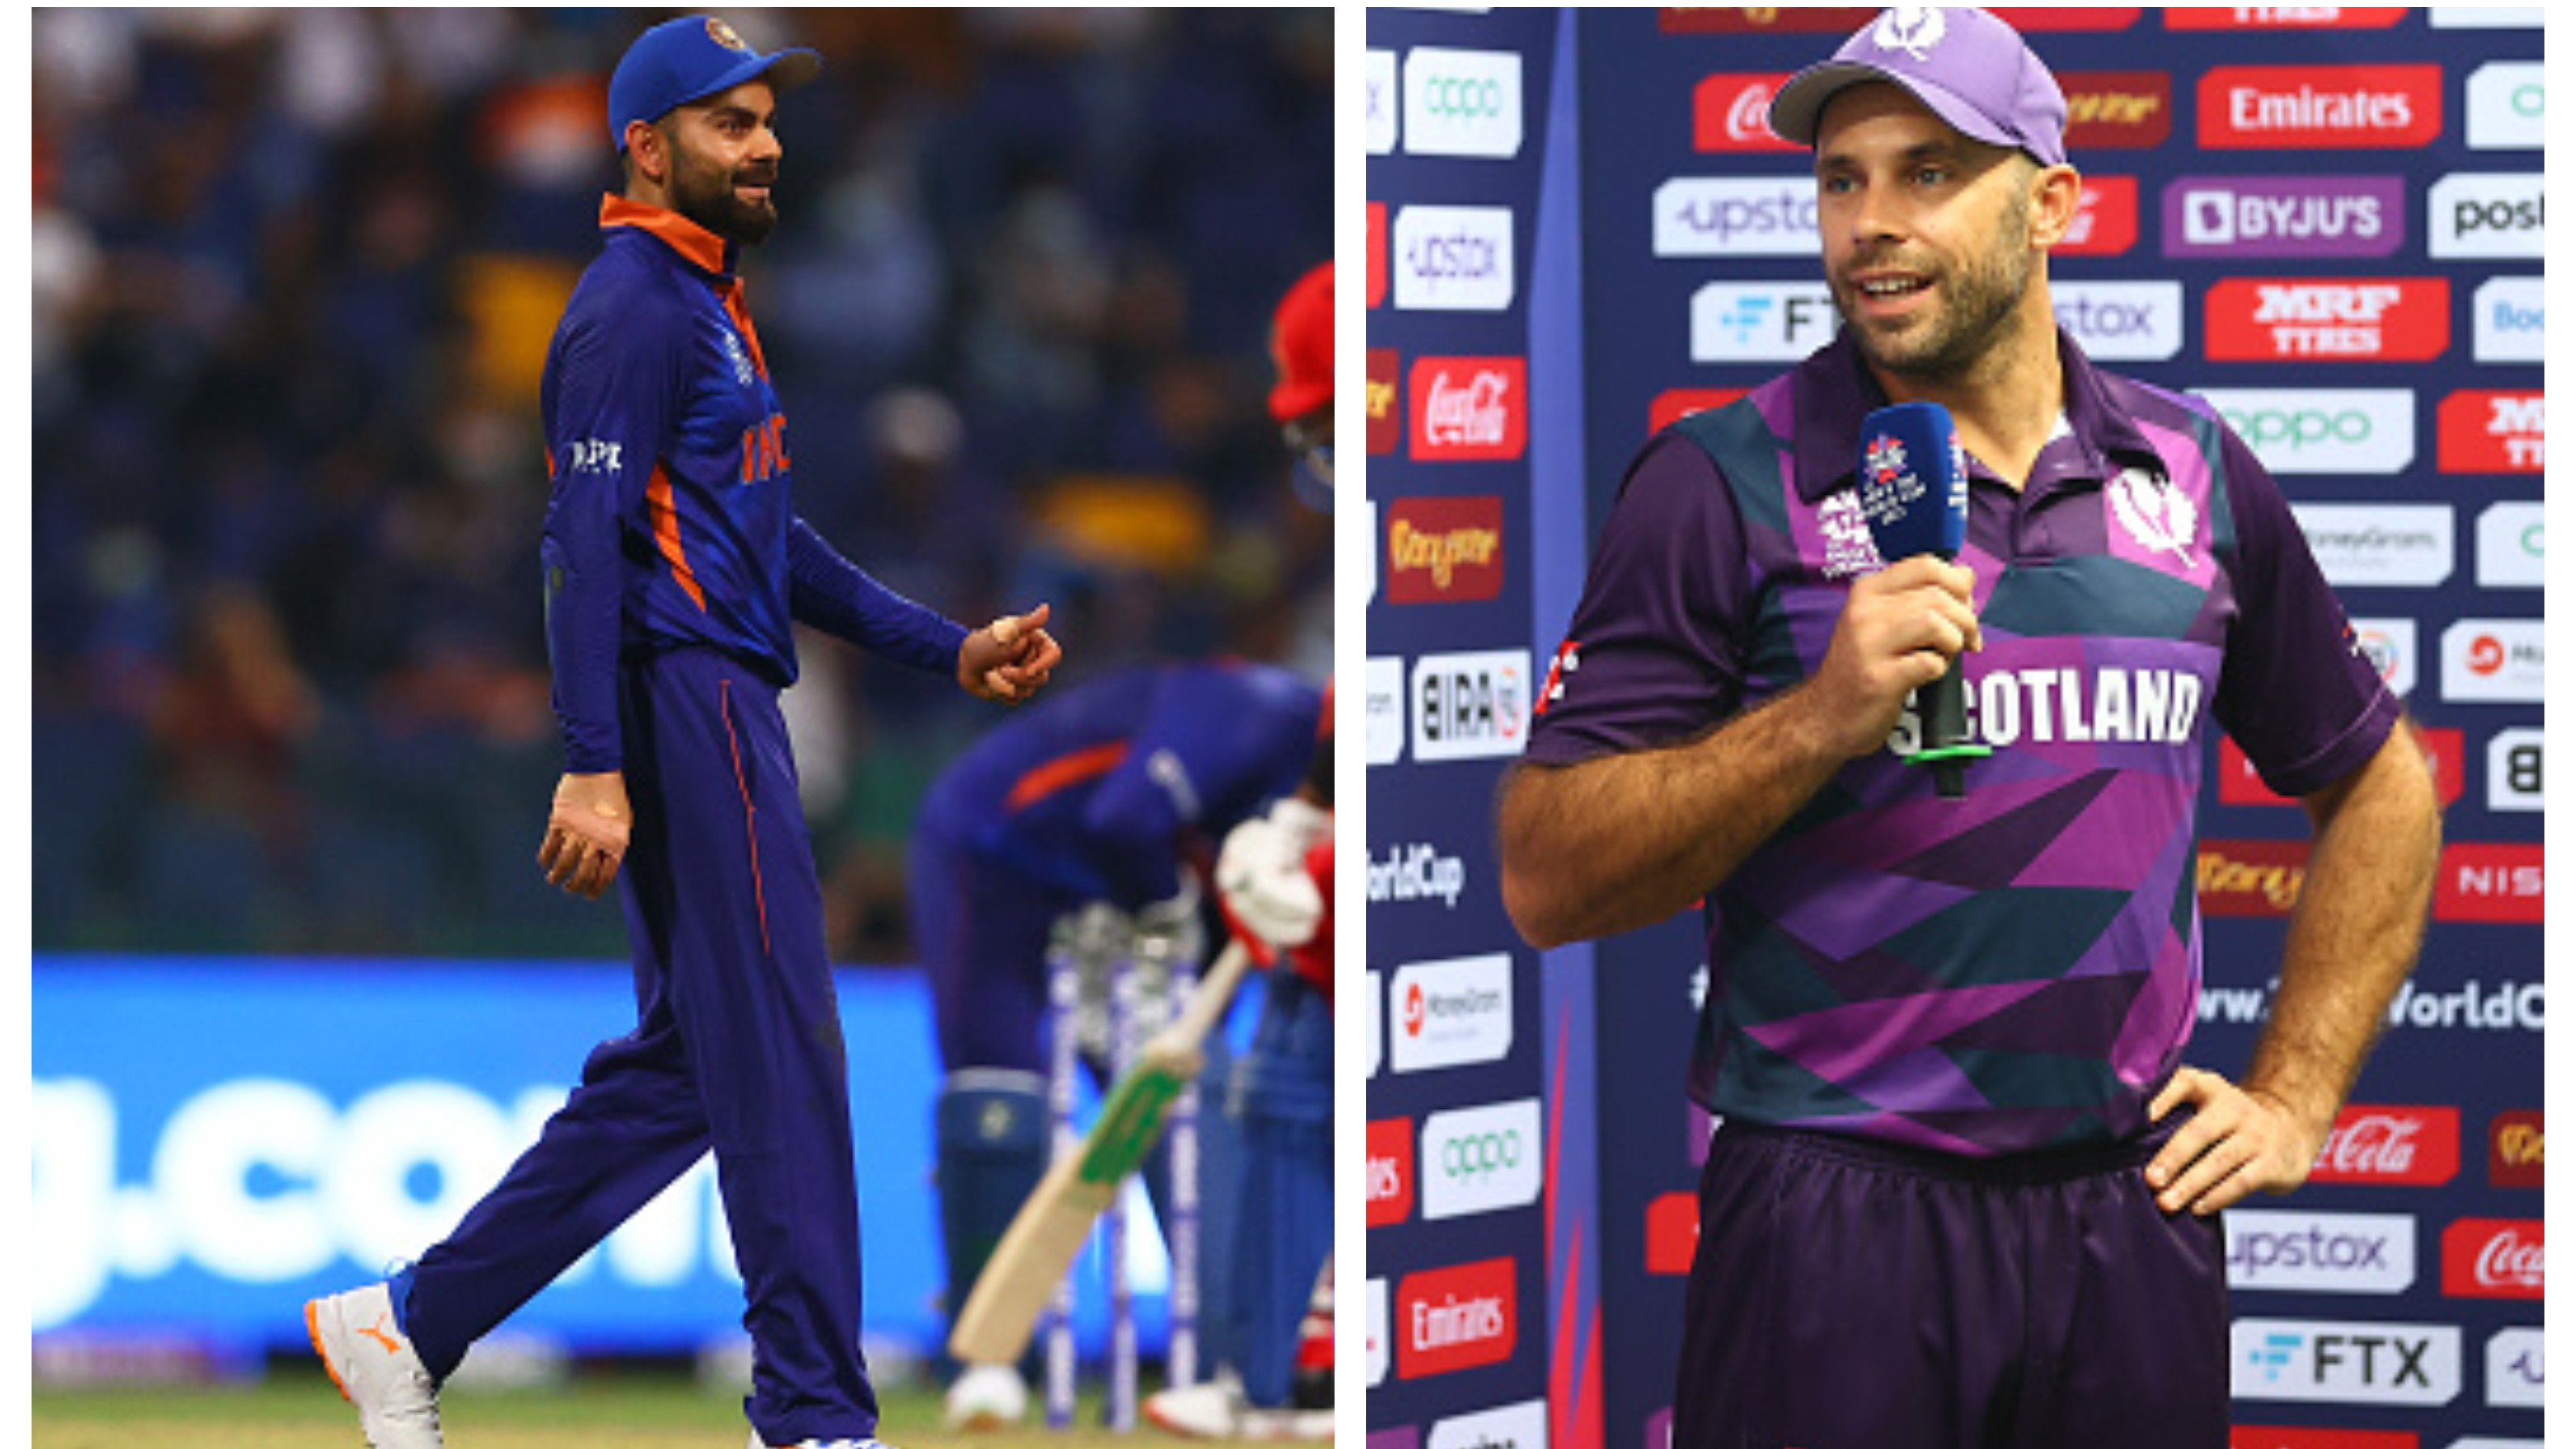 T20 World Cup 2021: Scotland skipper Kyle Coetzer wants Virat Kohli to come in their dressing room after game